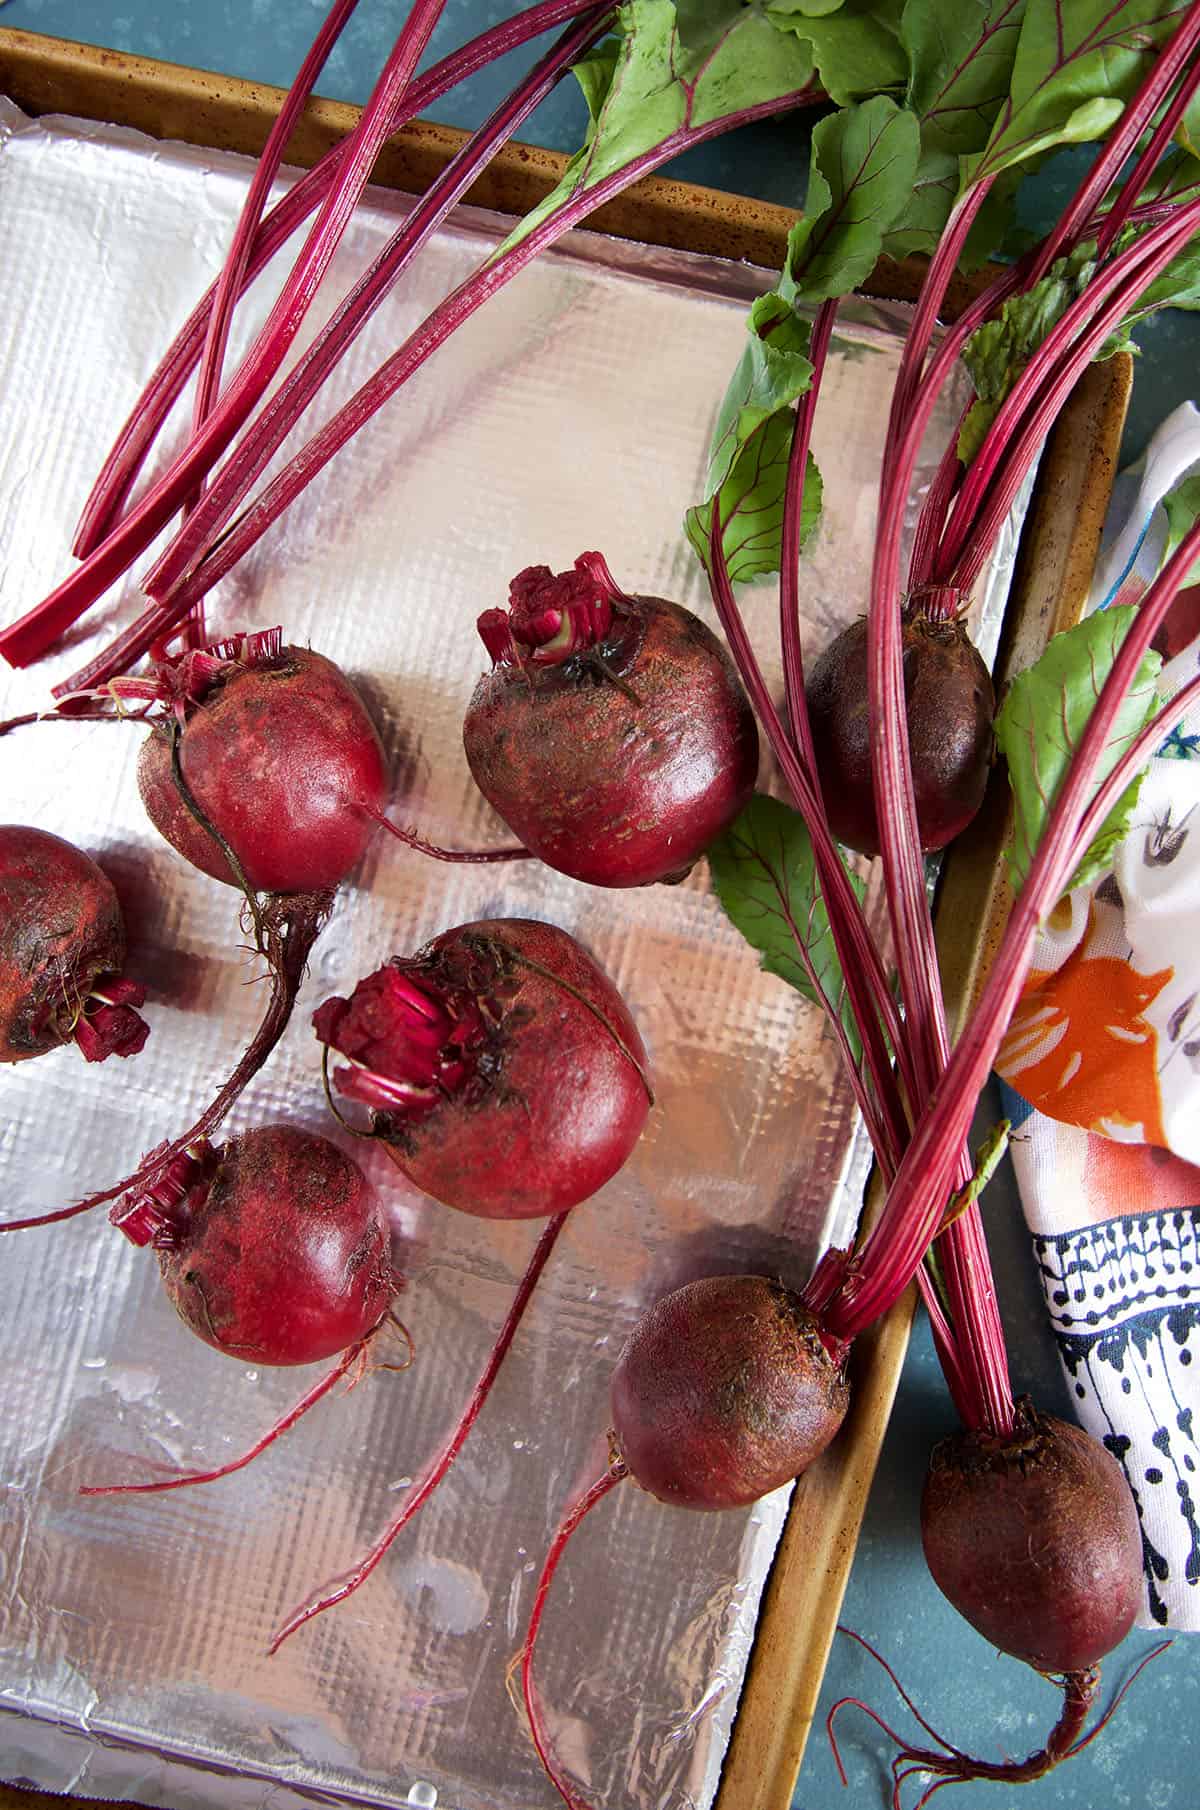 Whole beets are placed on a baking sheet.